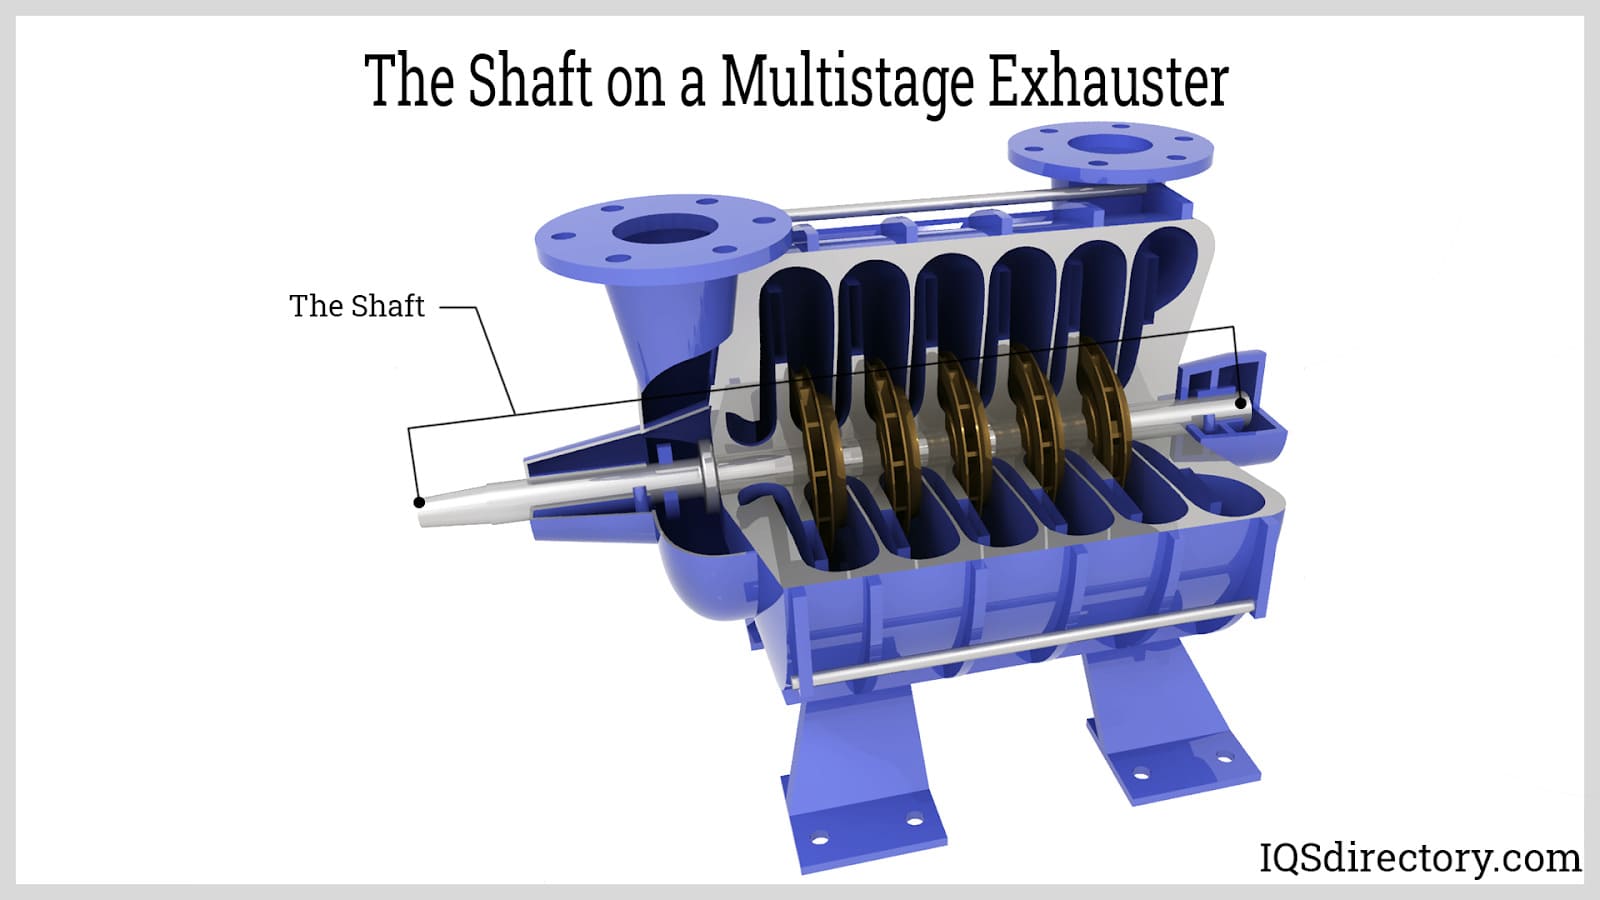 The Shaft on a Multistage Exhauster